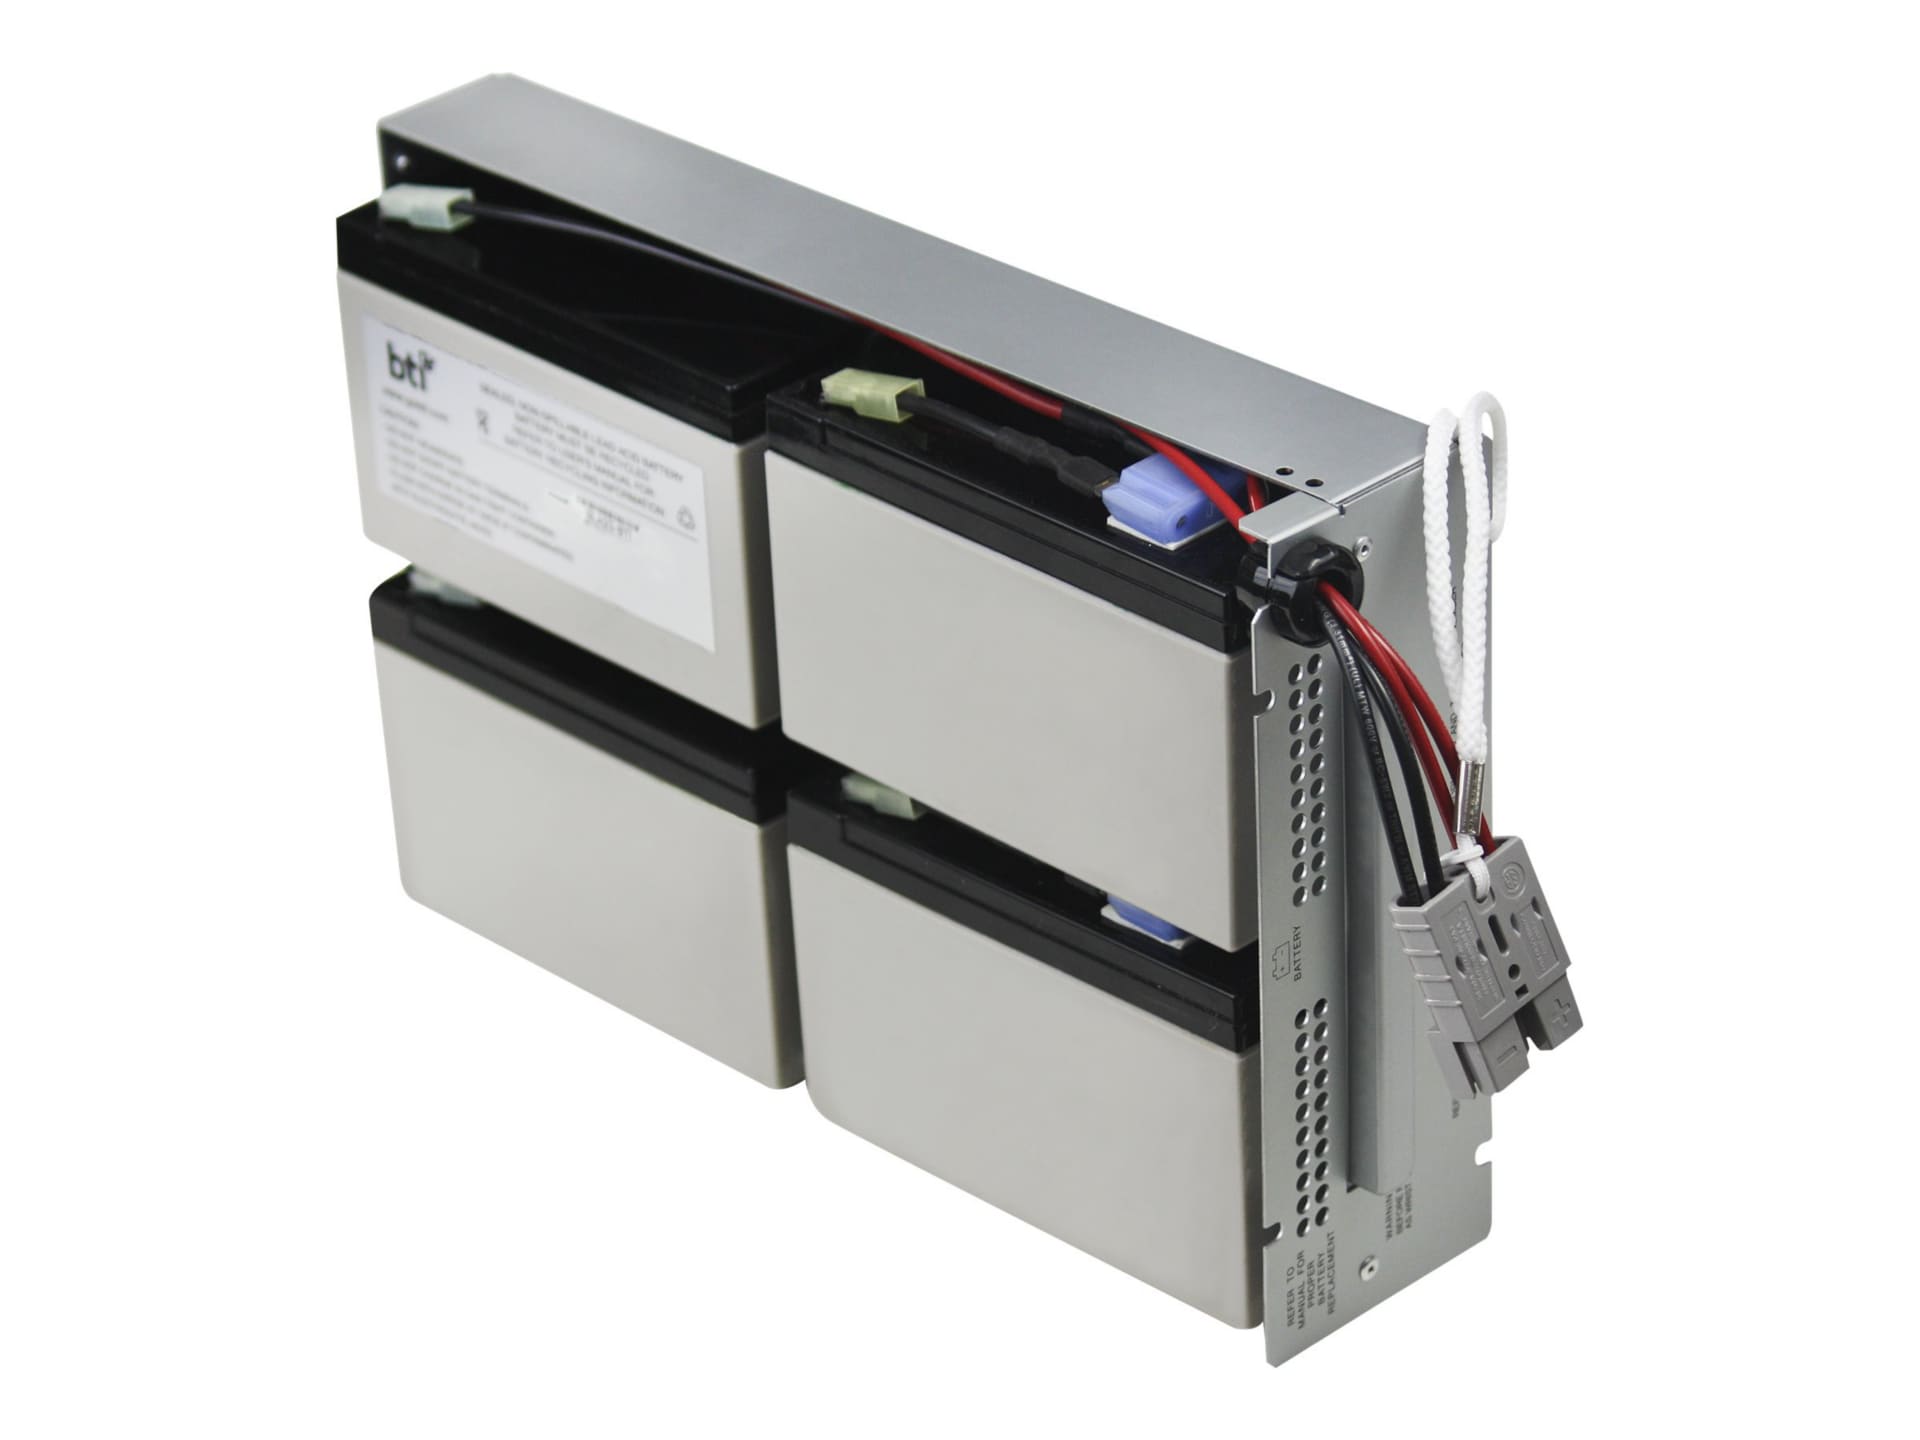 Battery Technology – BTI Replacement Battery for the RBC23 UPS Battery